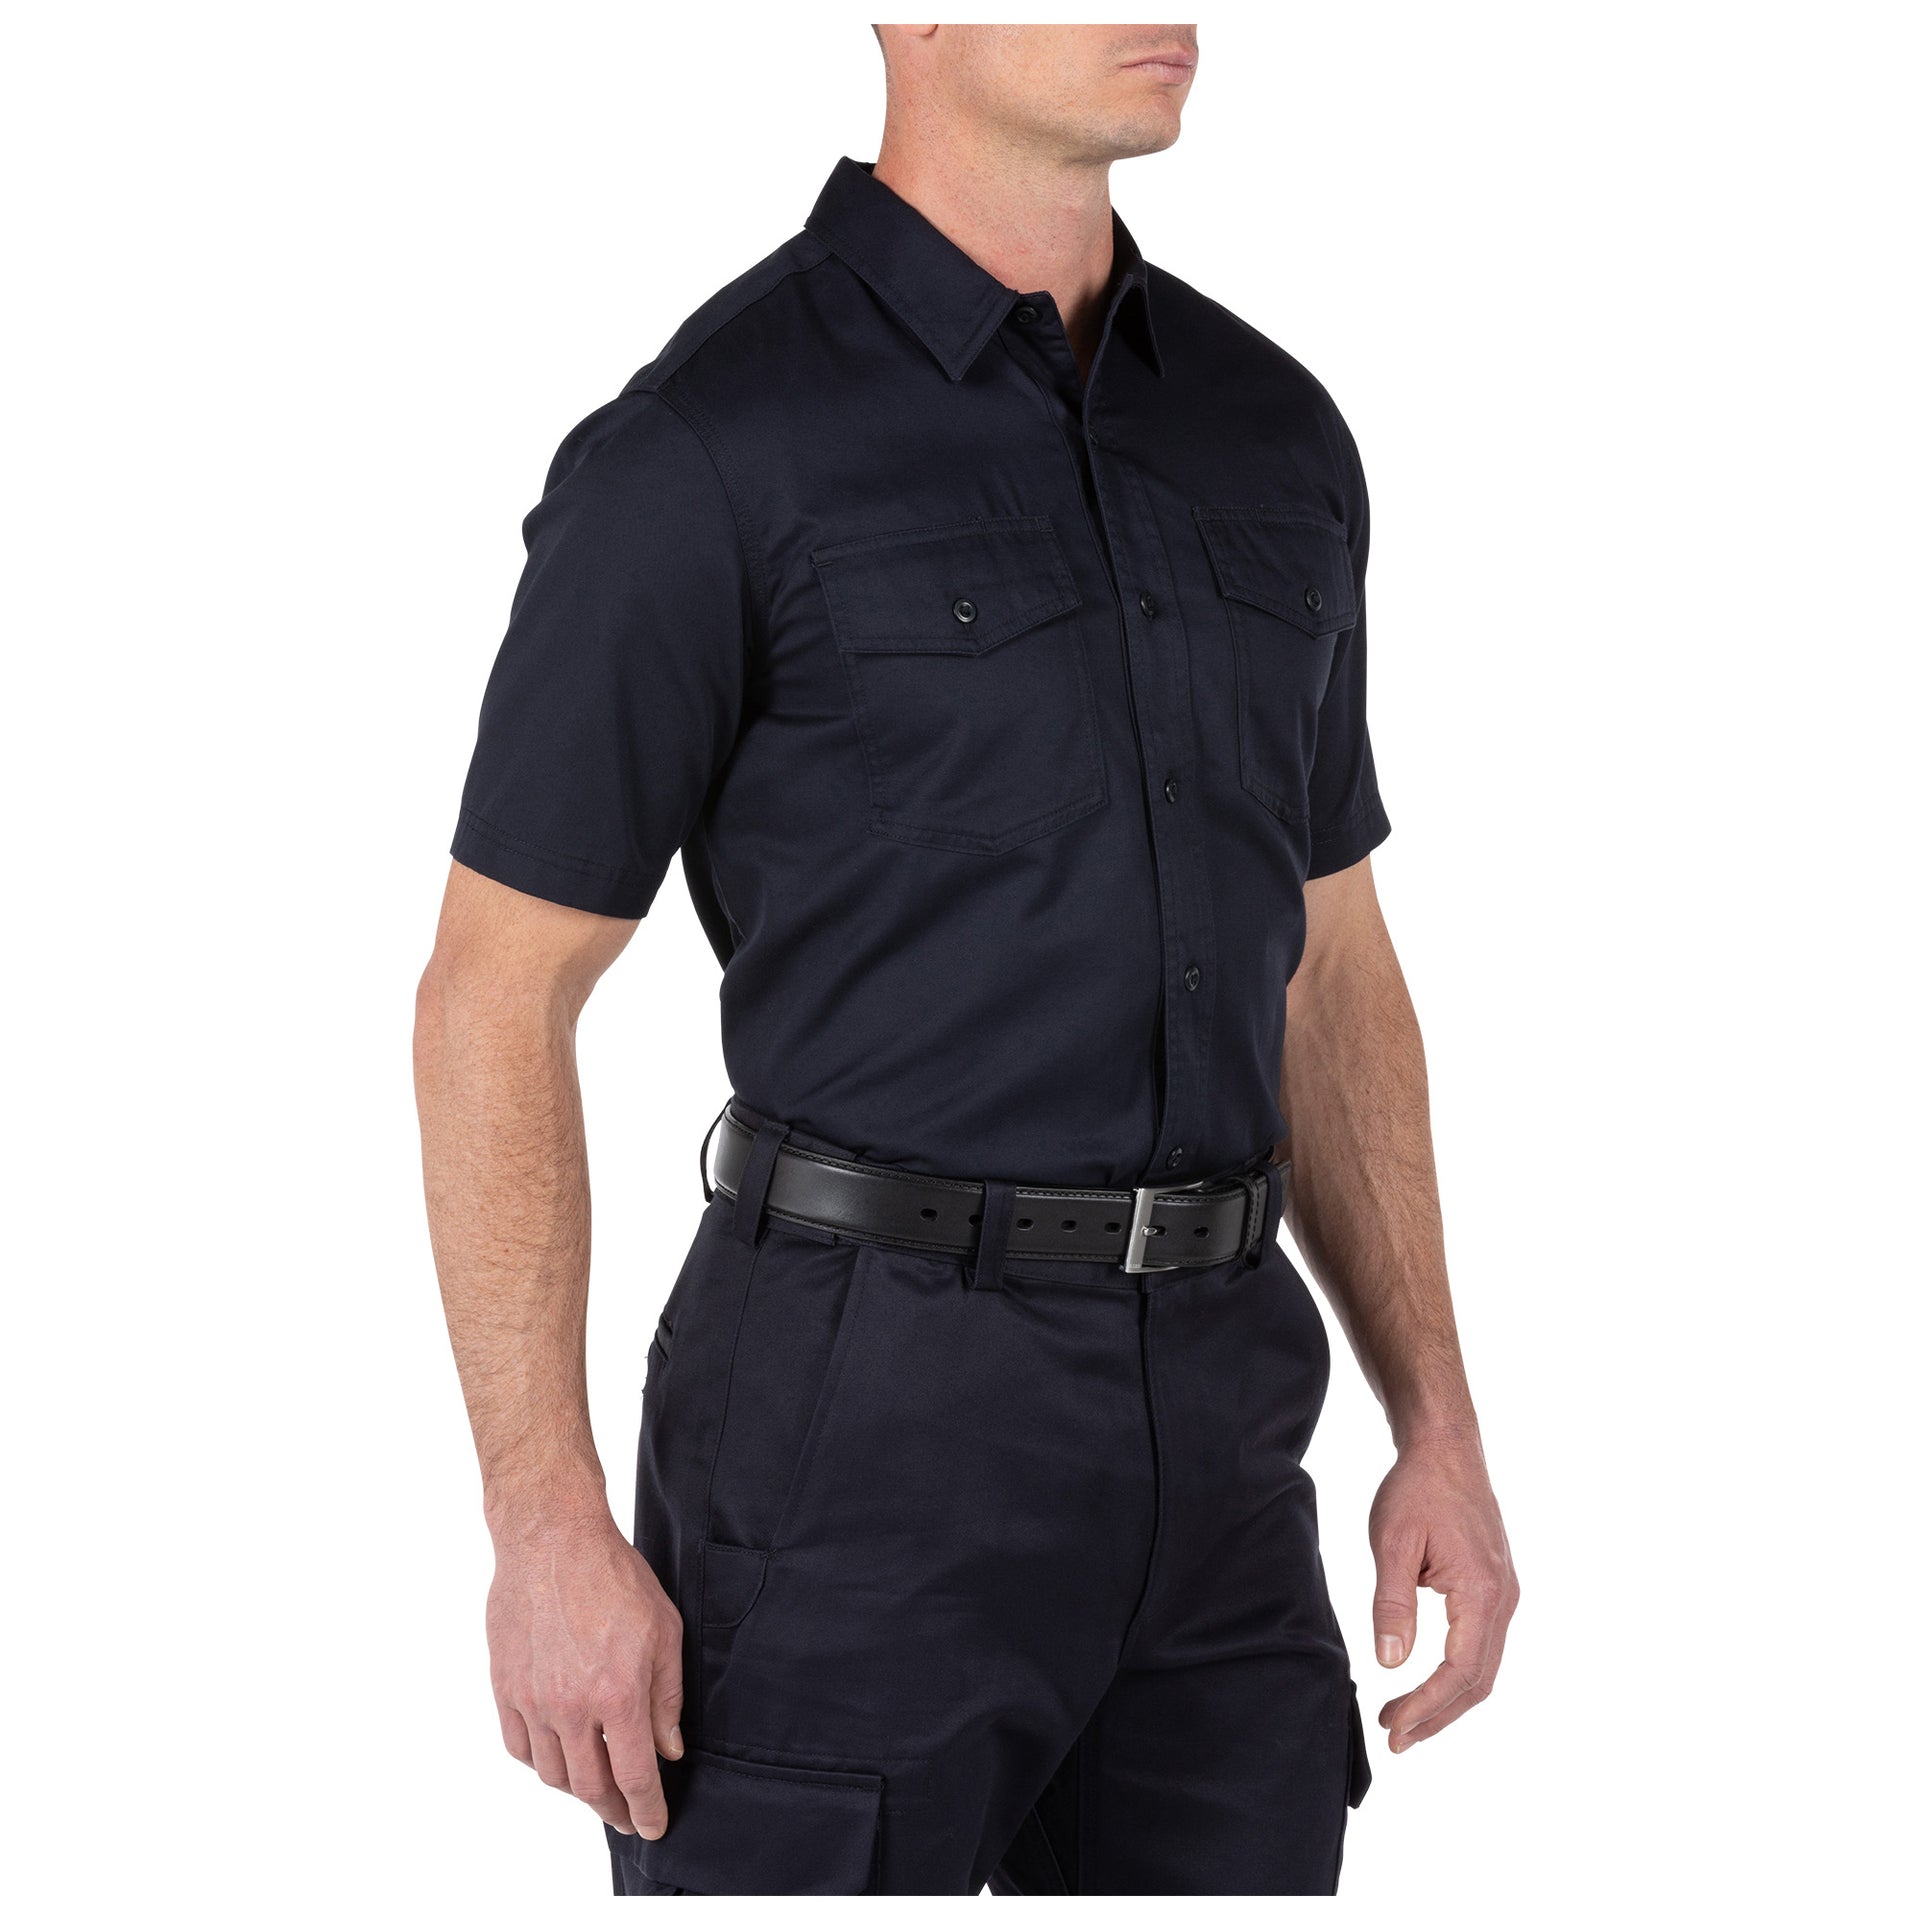 5.11 Tactical Company Short Sleeve Shirt (71391) | The Fire Center | Fuego Fire Center | Firefighter Gear |  Ready to answer every call through a busy shift, Short Sleeve Shirt backs you with a vital layer of safety (certified to NFPA 1975, 2019 edition) in a high-tech, low maintenance fabric. It’s made with a soft, & durable cotton twill that’s wrinkle-resistant with protective Firefly™ thread